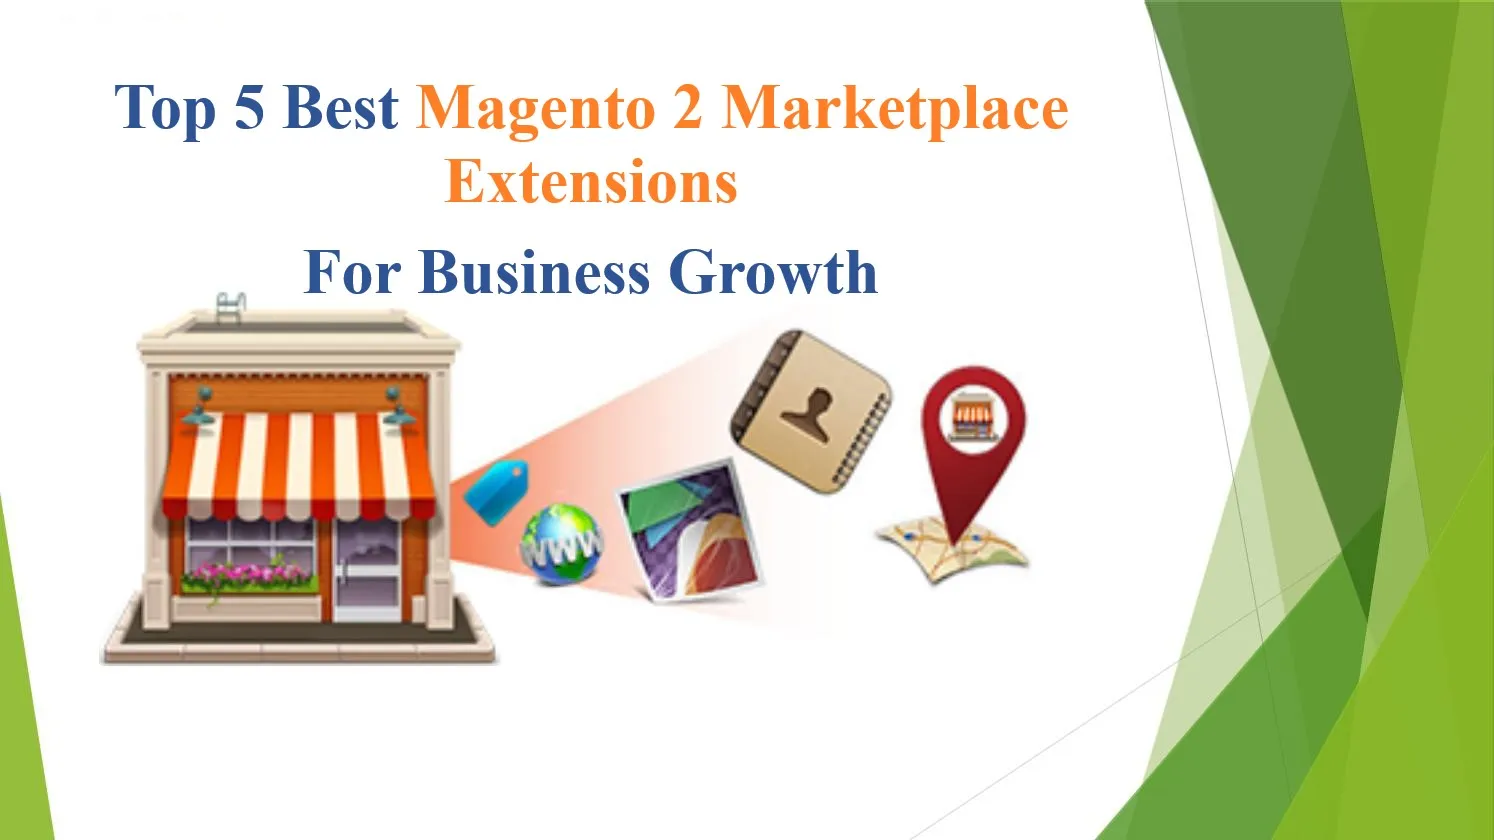 Top 5 Best Magento 2 Marketplace Extensions For Business Growth